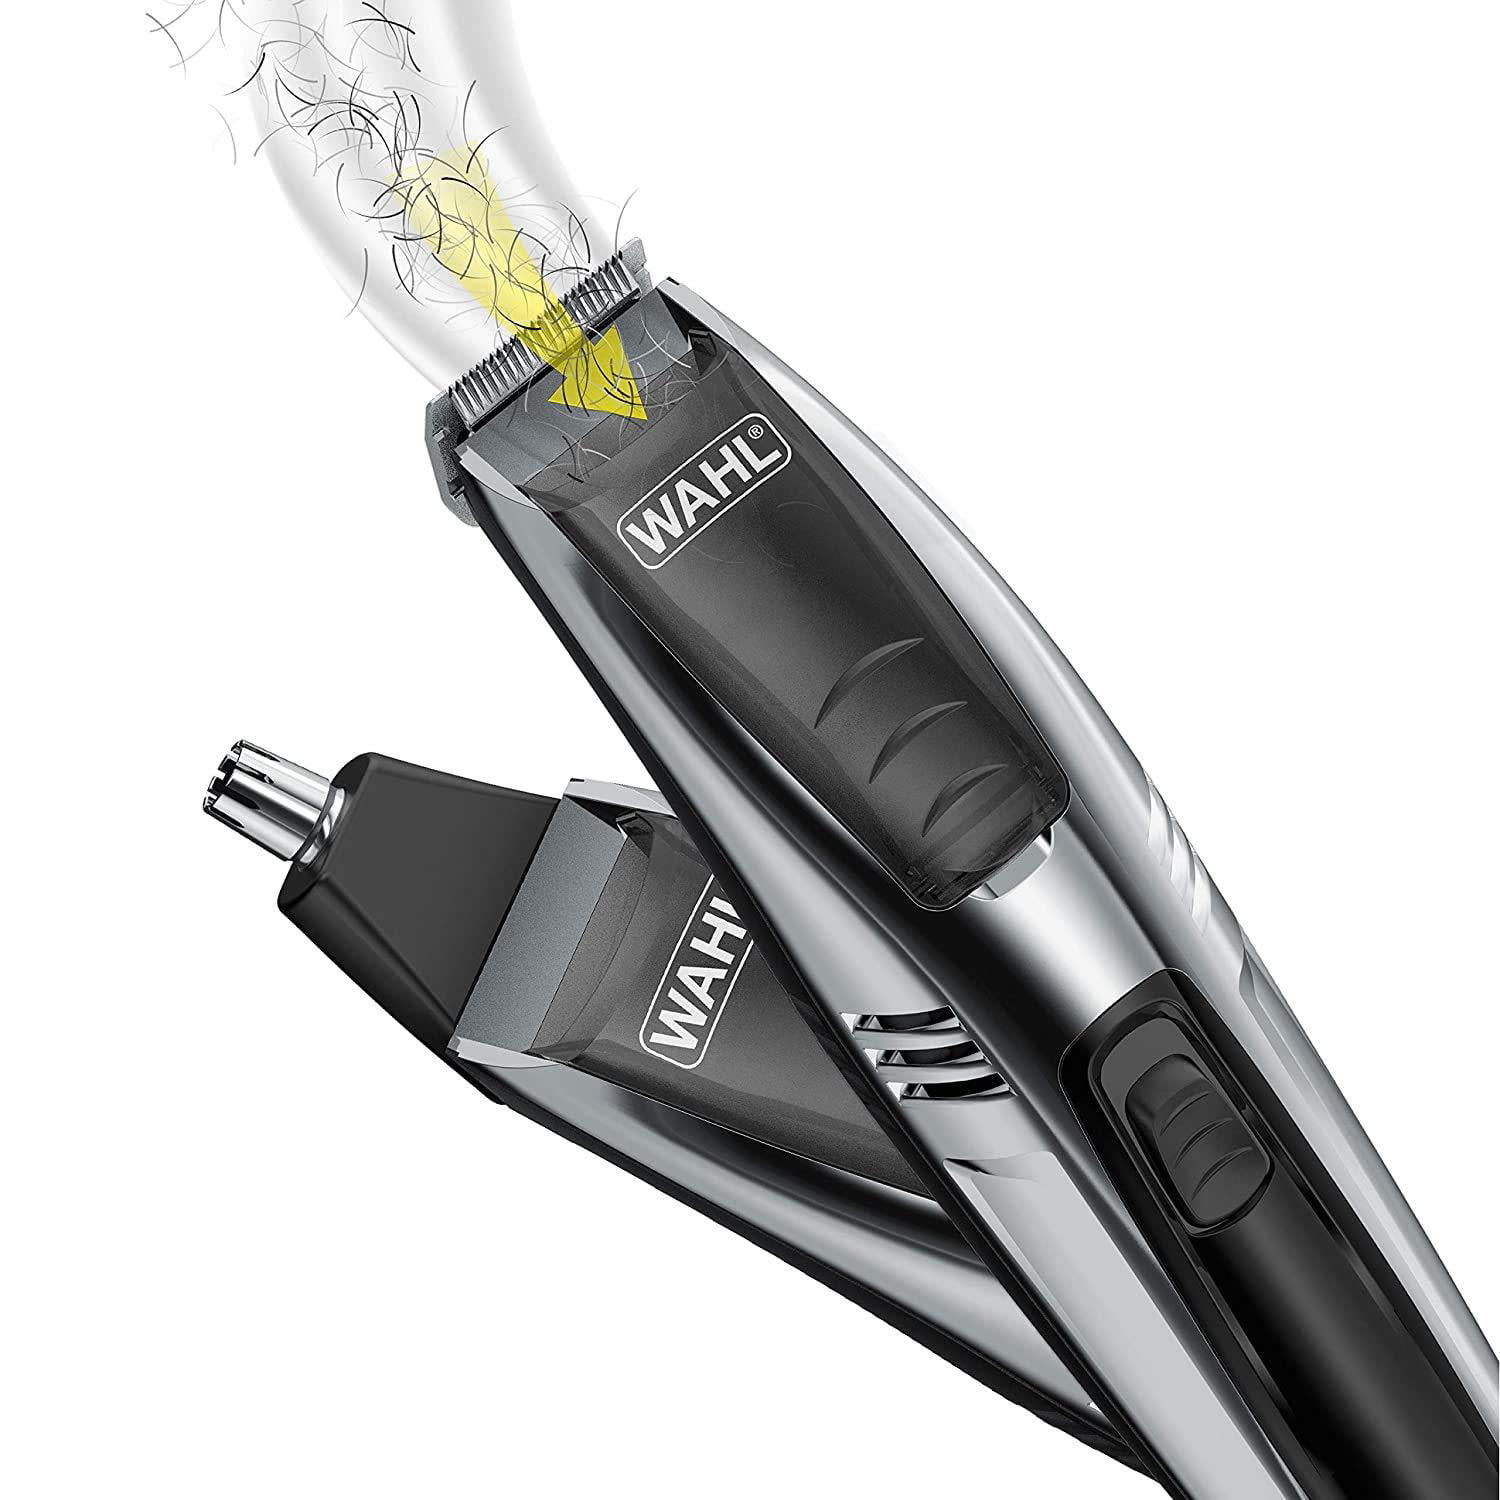 Wahl Model 9870-100 Vacuum Trimmer Kit with Powerful Suction for Beards